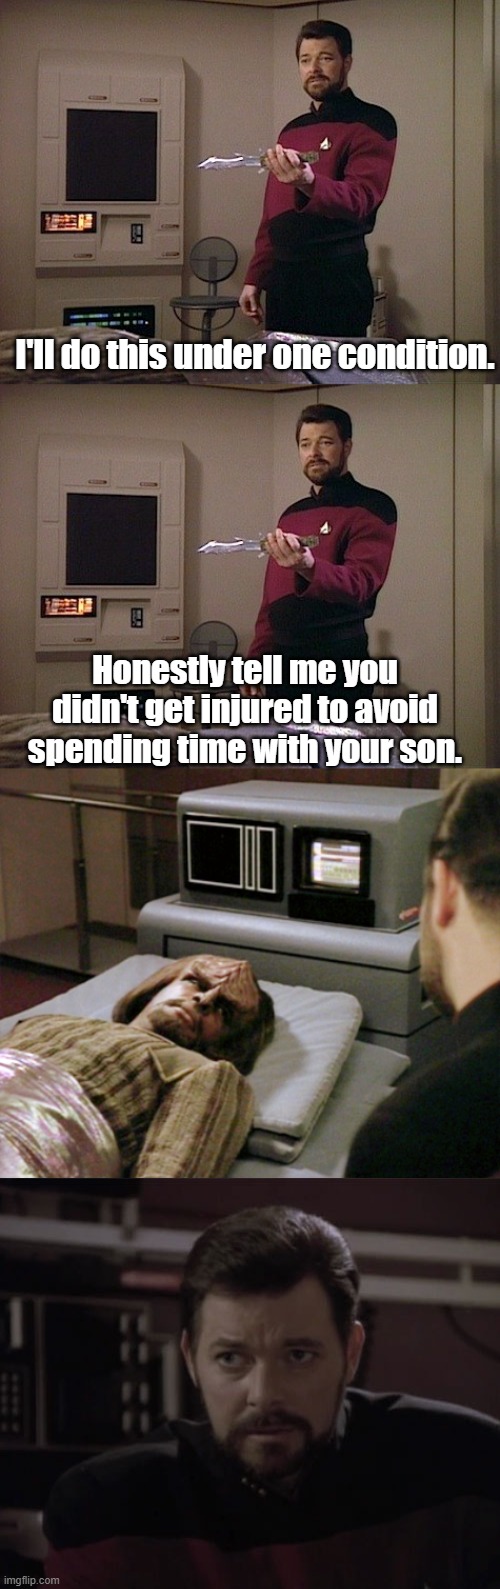 Why Worf really got injured. | I'll do this under one condition. Honestly tell me you didn't get injured to avoid spending time with your son. | image tagged in star trek the next generation,riker,lieutenant worf,worf | made w/ Imgflip meme maker